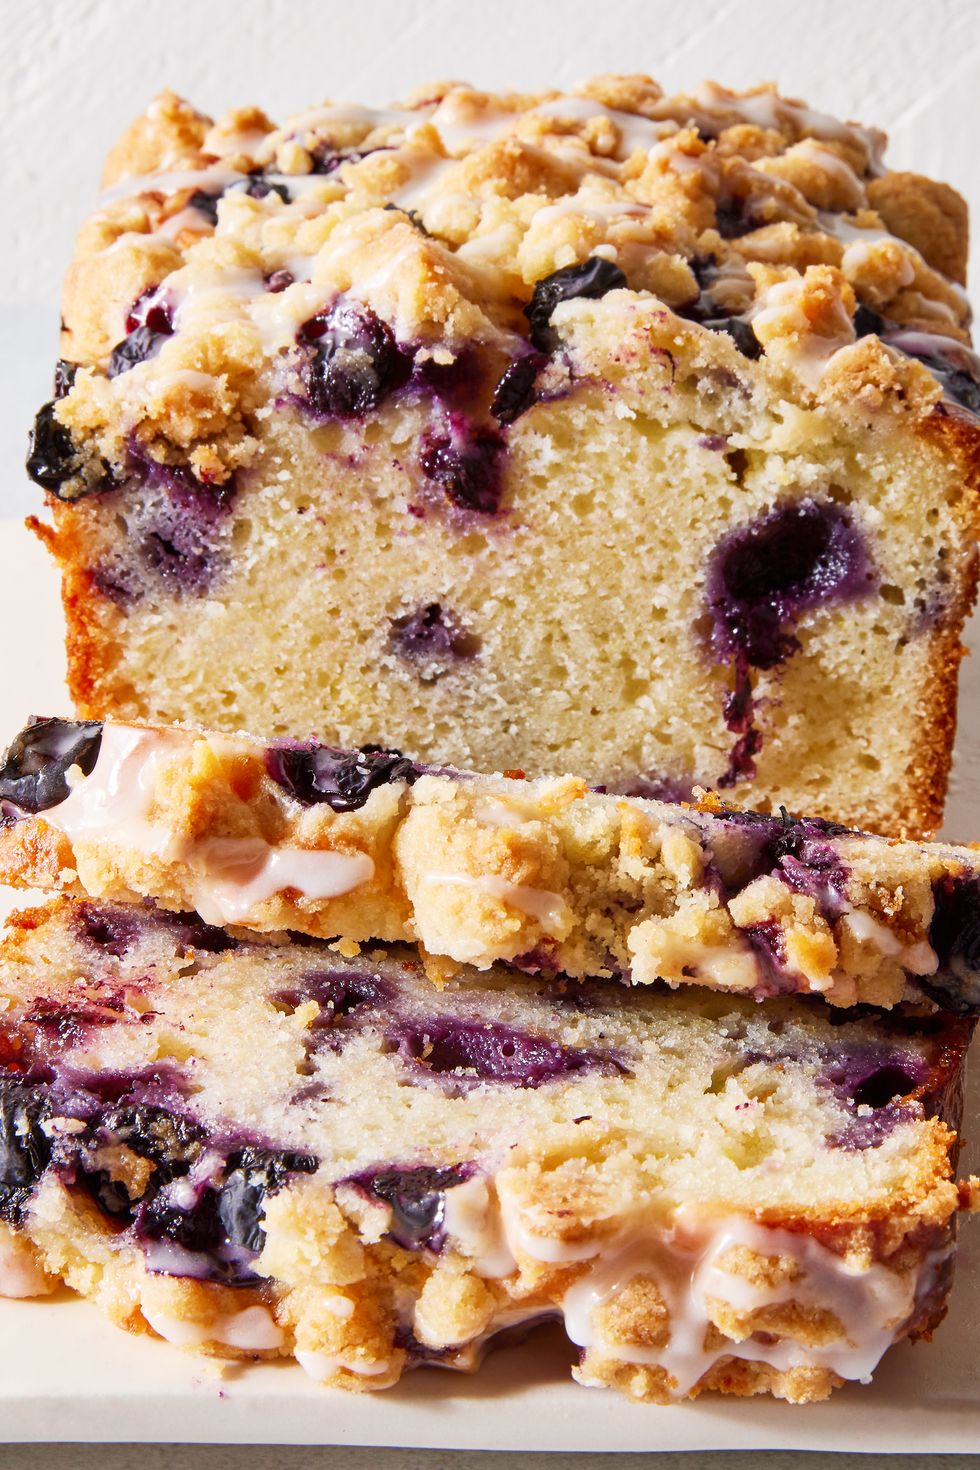 copycat costco lemon blueberry pound cake with a lemon glaze and crumble topping